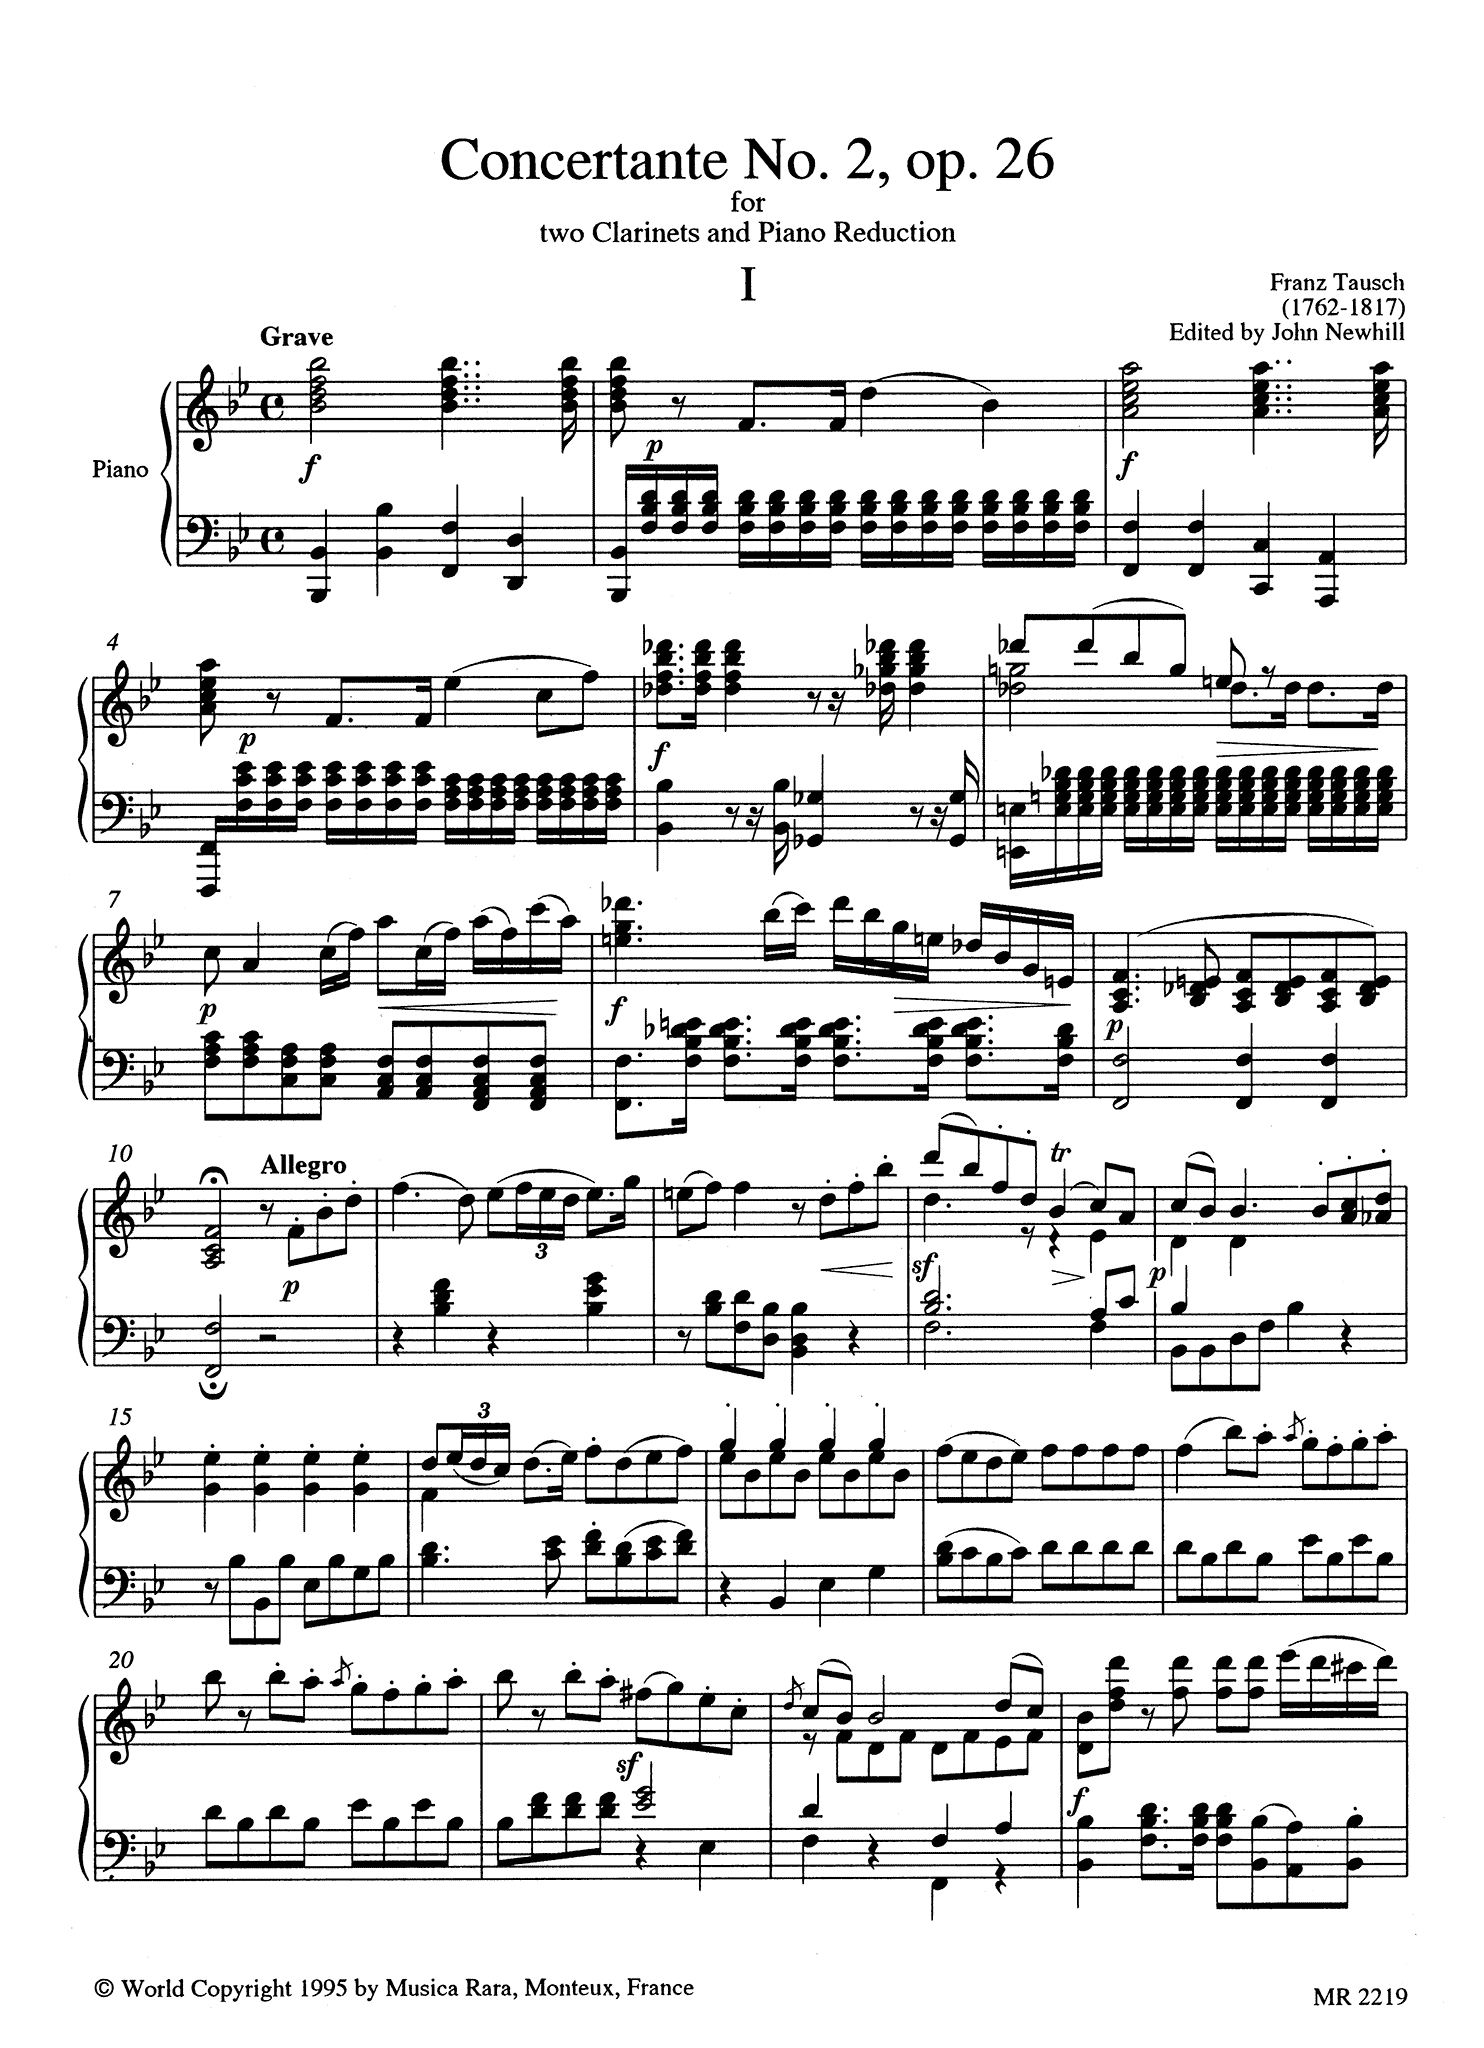 Franz Tausch Concertante No. 2, Op. 26 2 clarinets & orchestra piano reduction - Movement 1